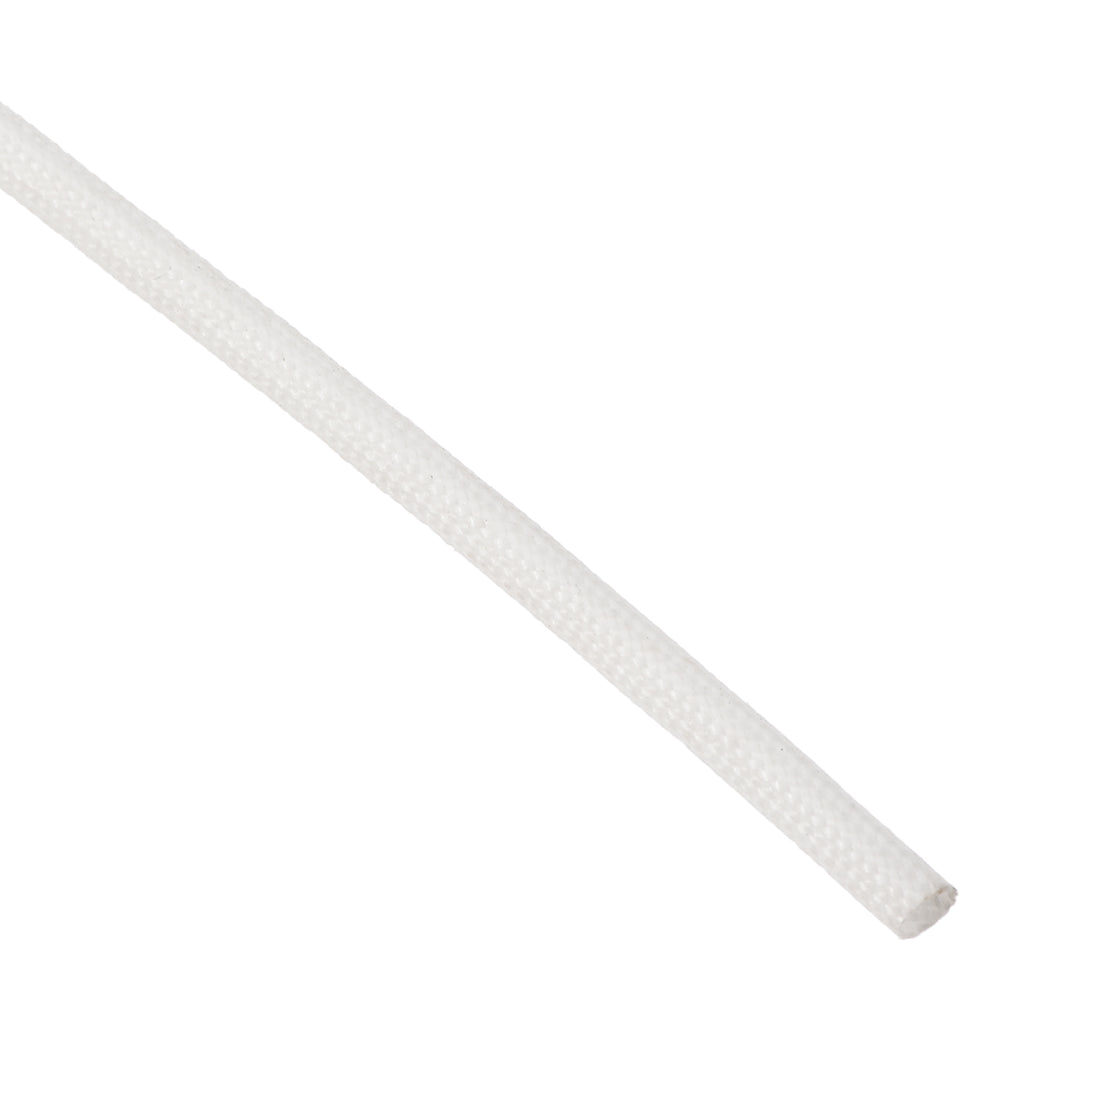 uxcell Uxcell Insulation Cable Protector,16.4Ft-2mm High TEMP Silicone Fiberglass Sleeve White